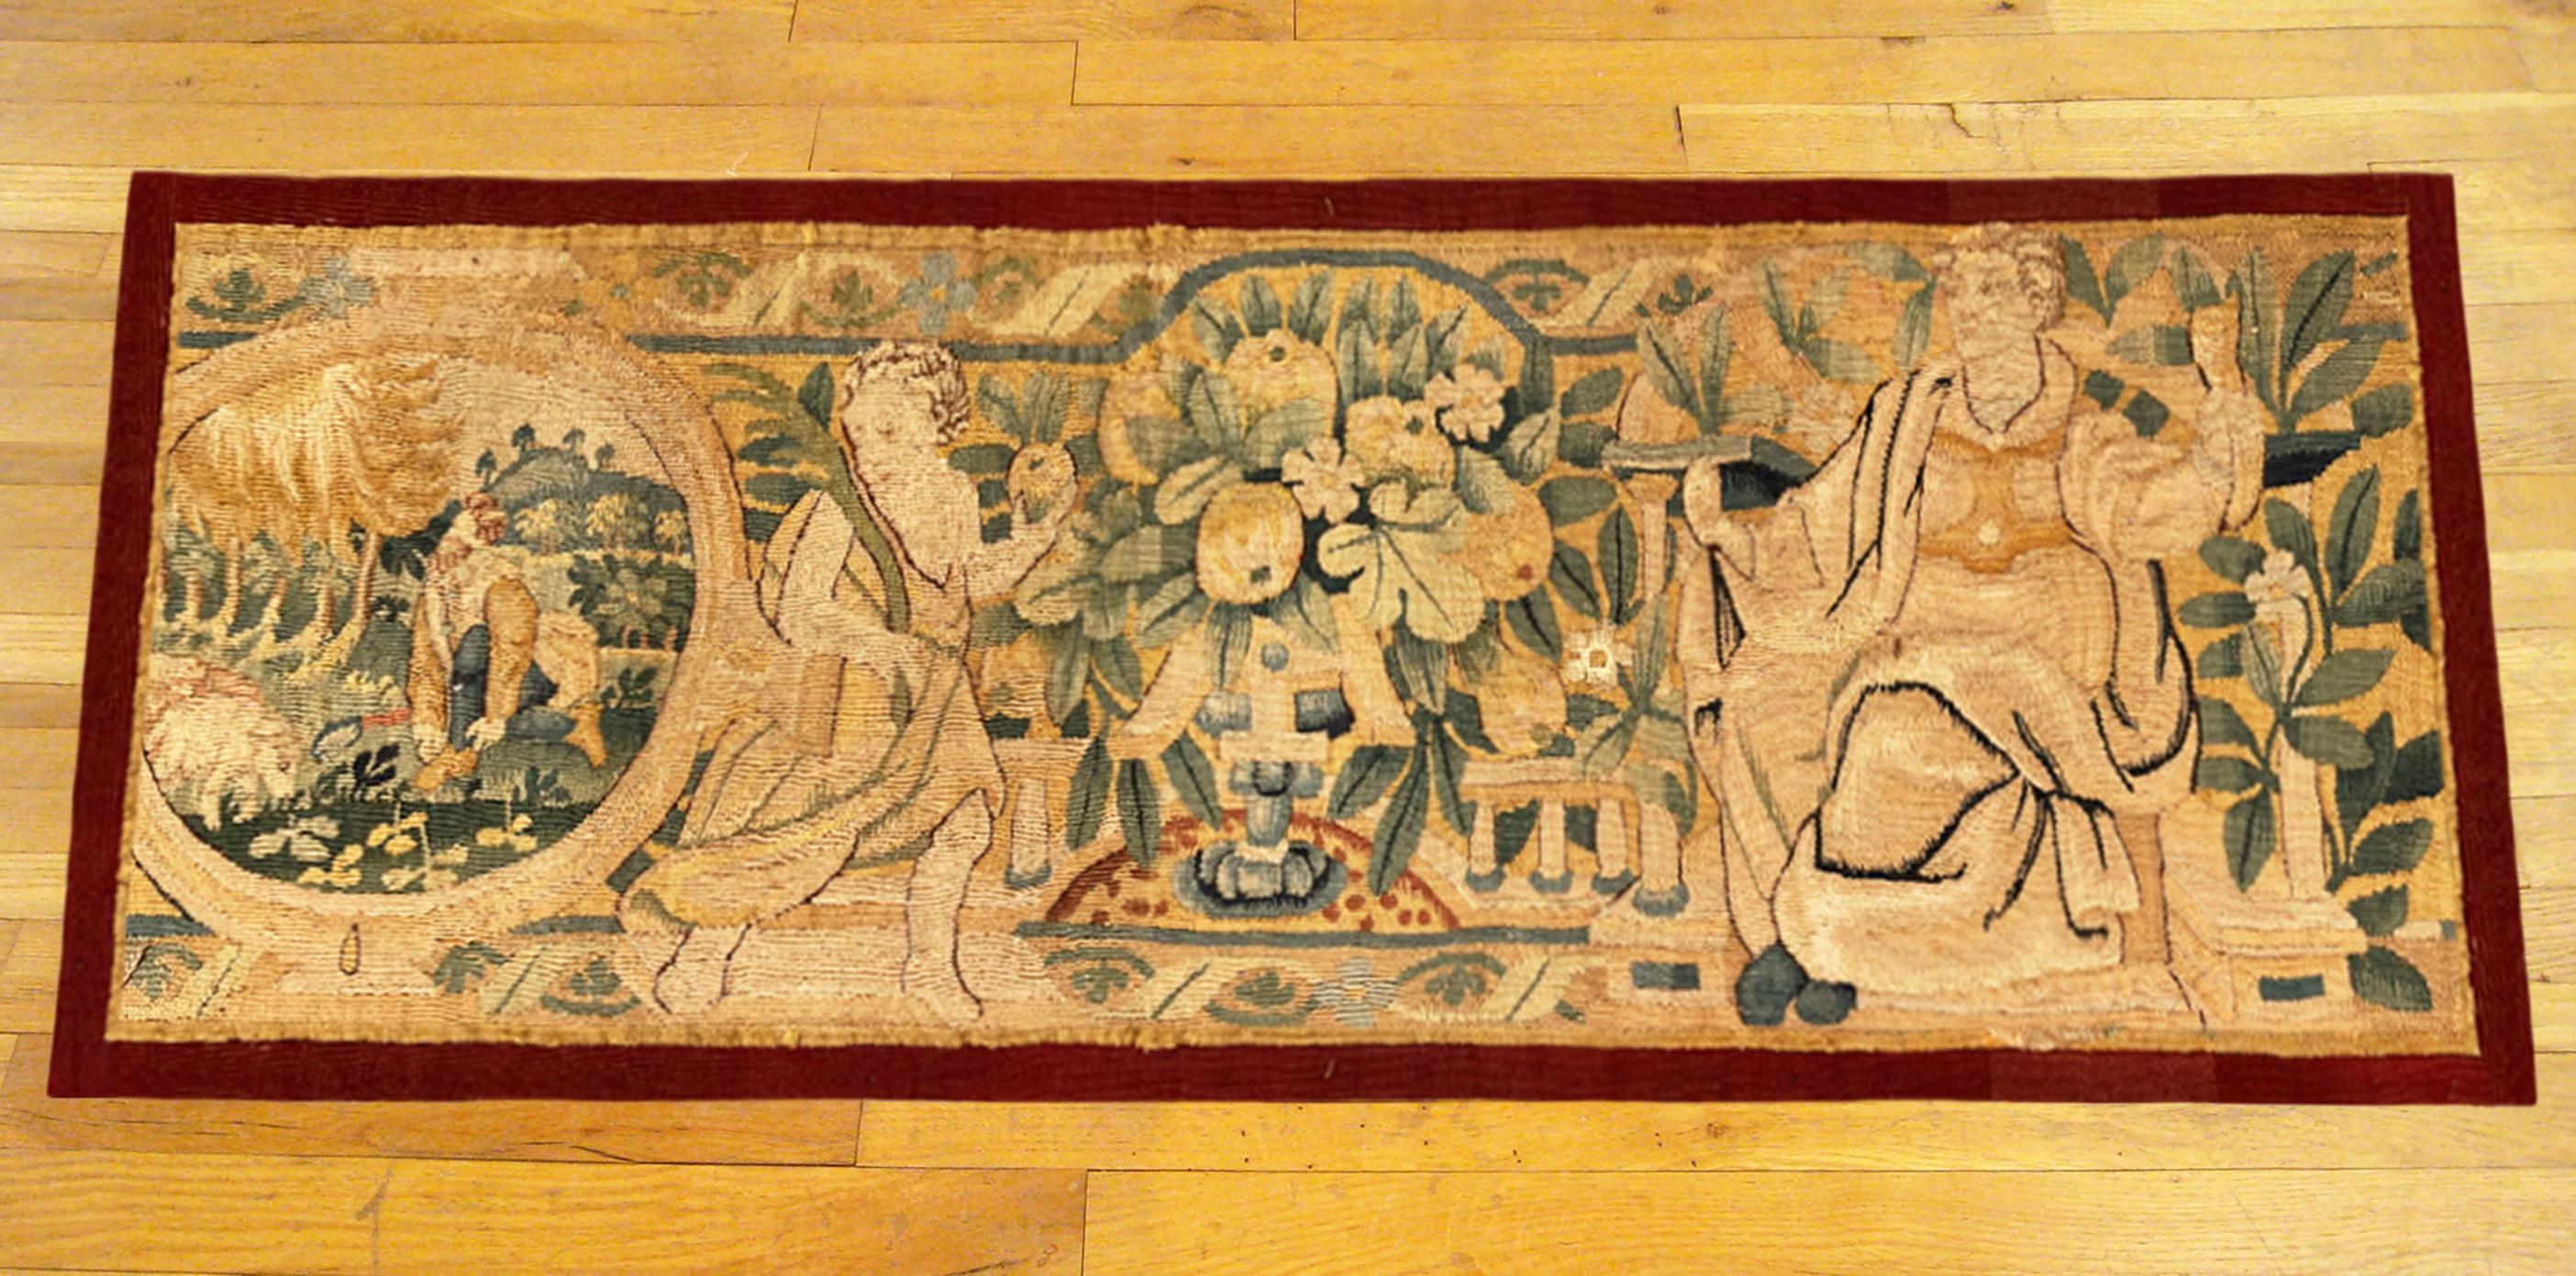 A 17th century Flemish Historical Tapestry panel. This horizontally oriented decorative tapestry panel depicts a regal female figure at right, with a mythological angelic figure at center, and an additional figure in a pendant cartouche at left. The